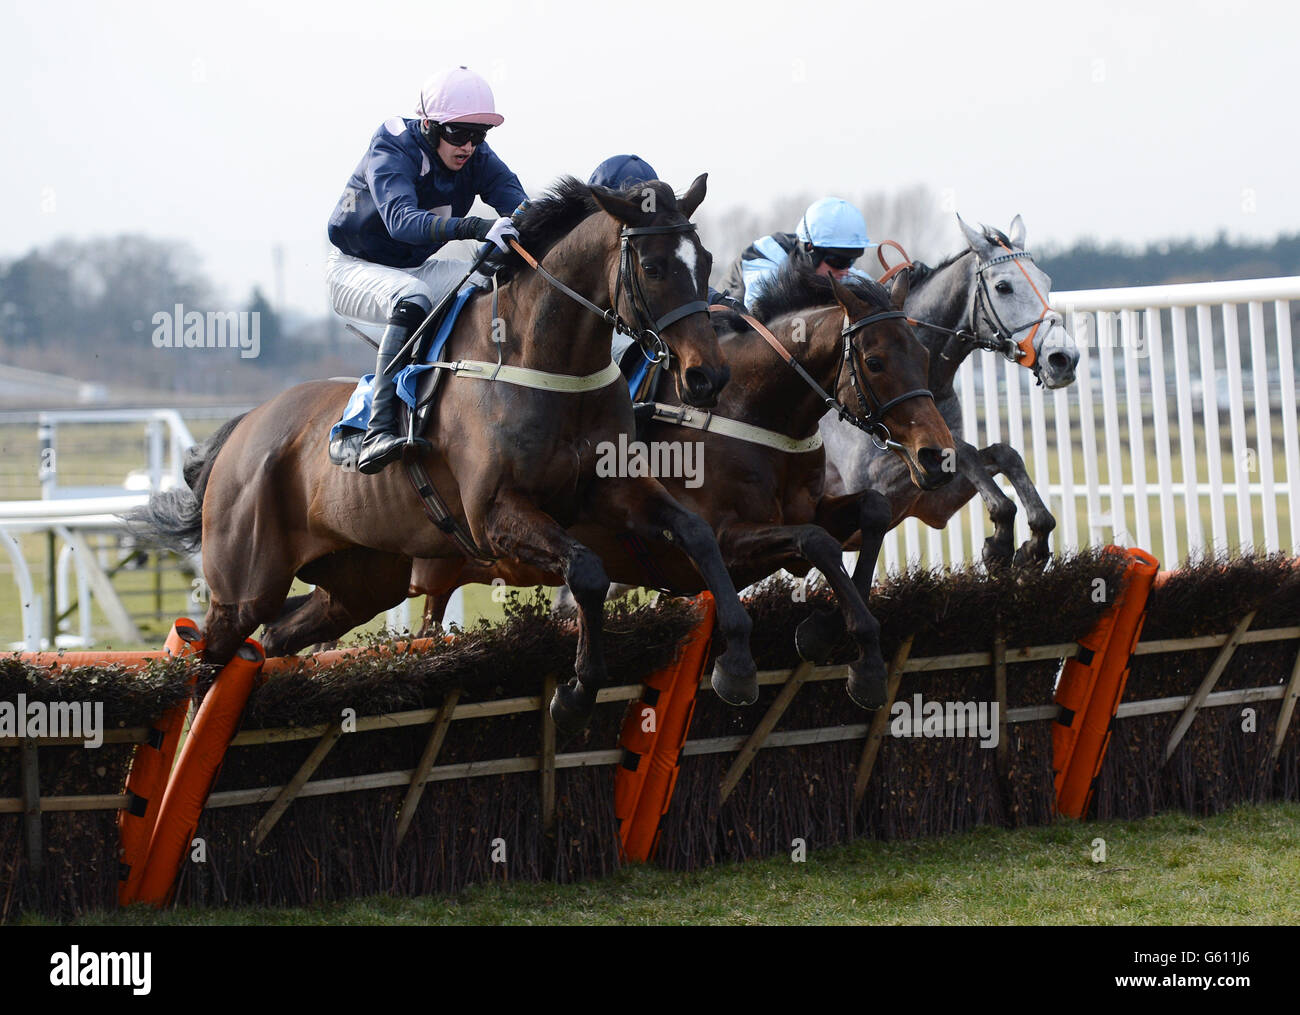 Noel Fehily ridden by Turbo Du Ranch (right) jump up to join Jonathan England and Green Wizard (left) over the final hurdle as they win the Watch Racing UK Handicap Hurdle Race at Wetherby Racecourse, West Yorkshire. Stock Photo